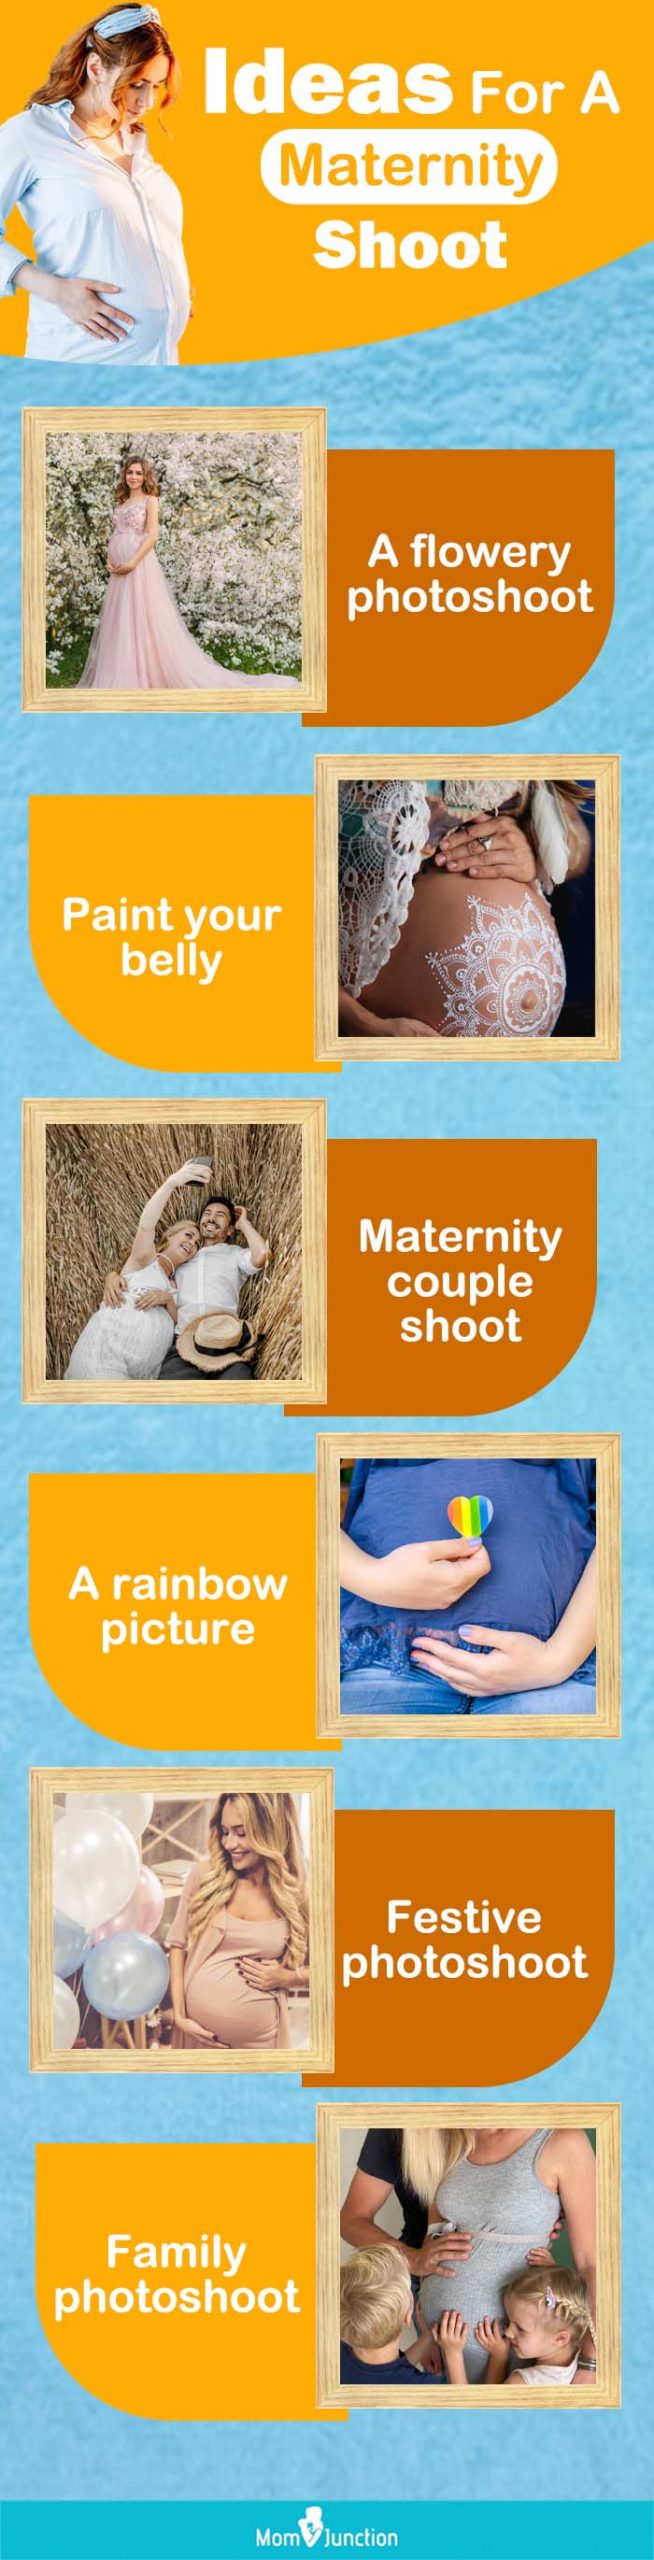 ideas for a maternity shoot (infographic)